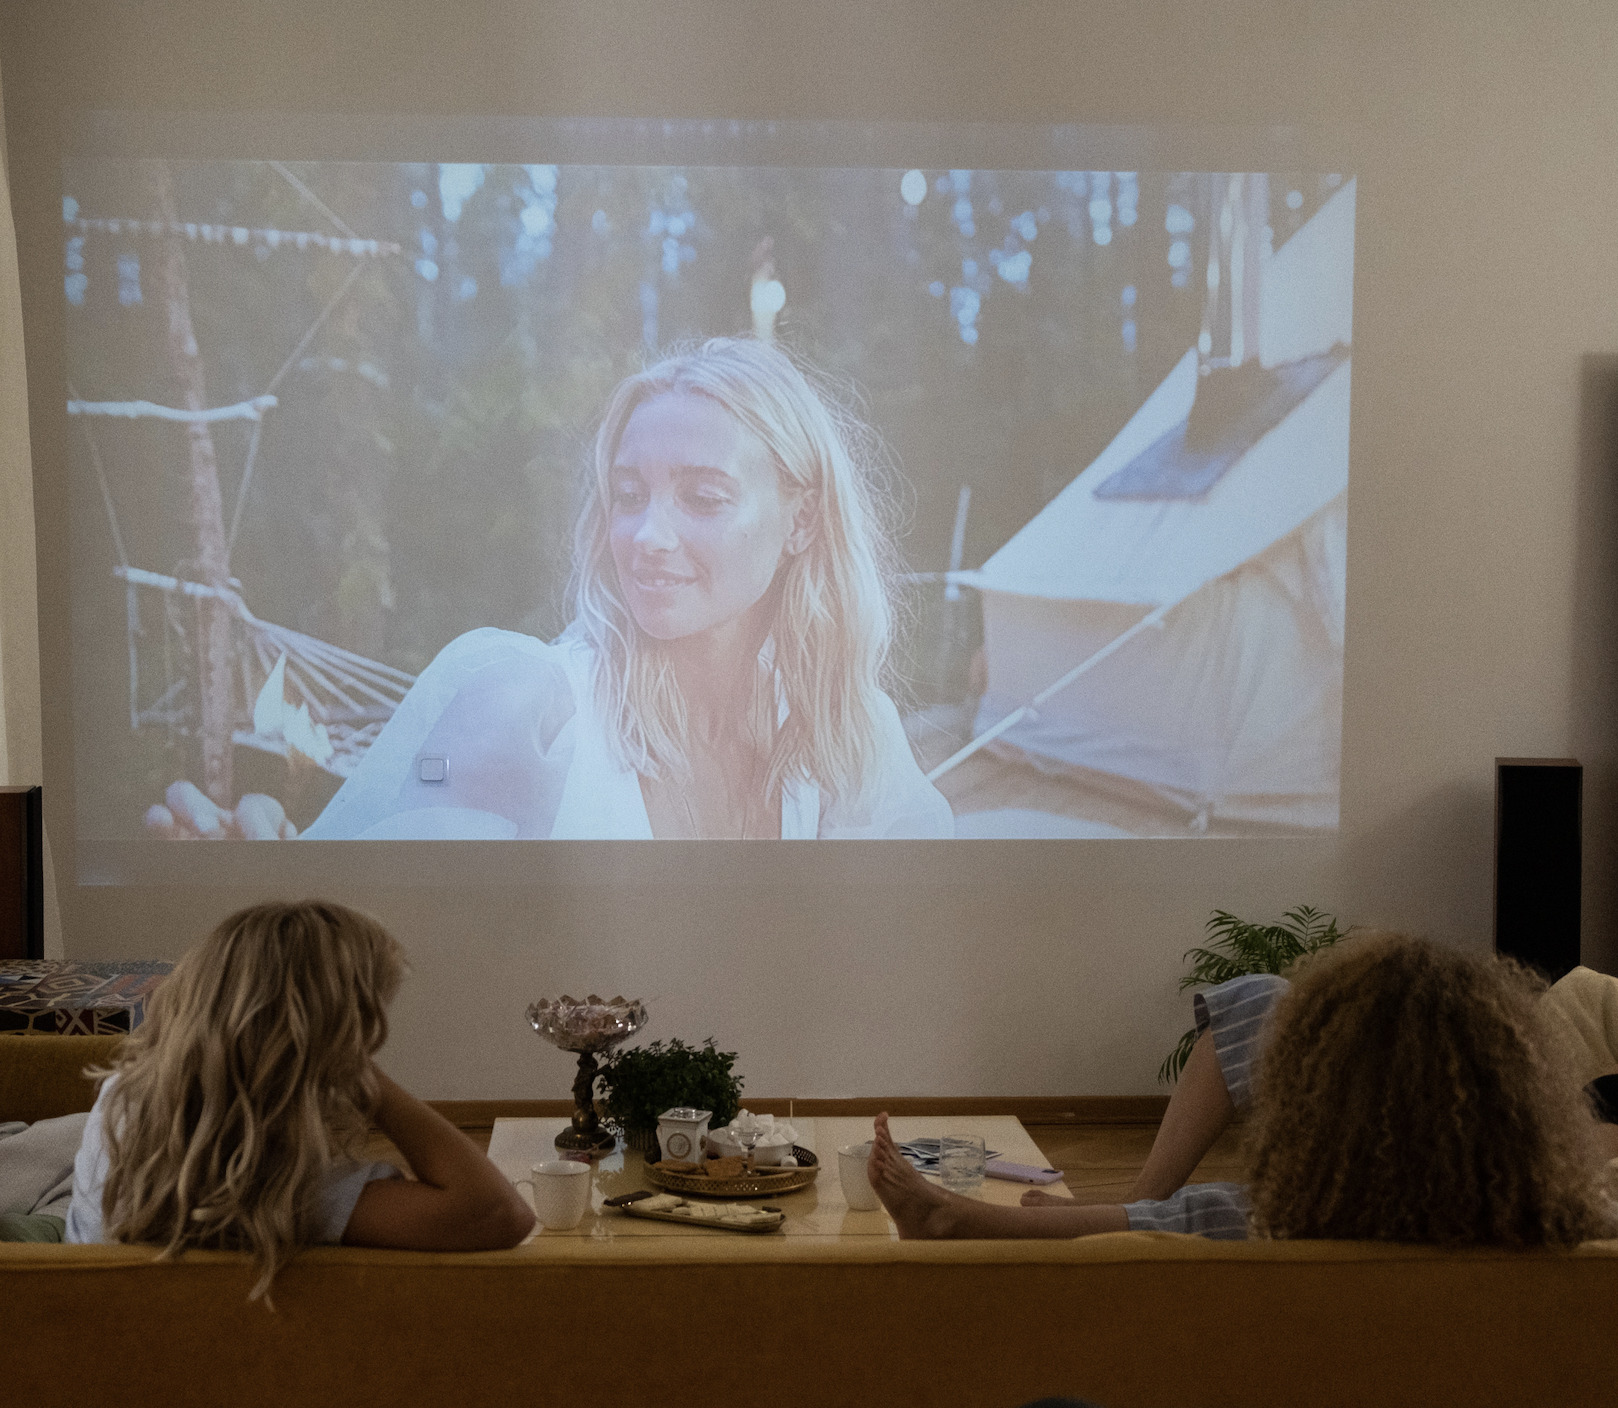 Women watching a movie on a projector screen 